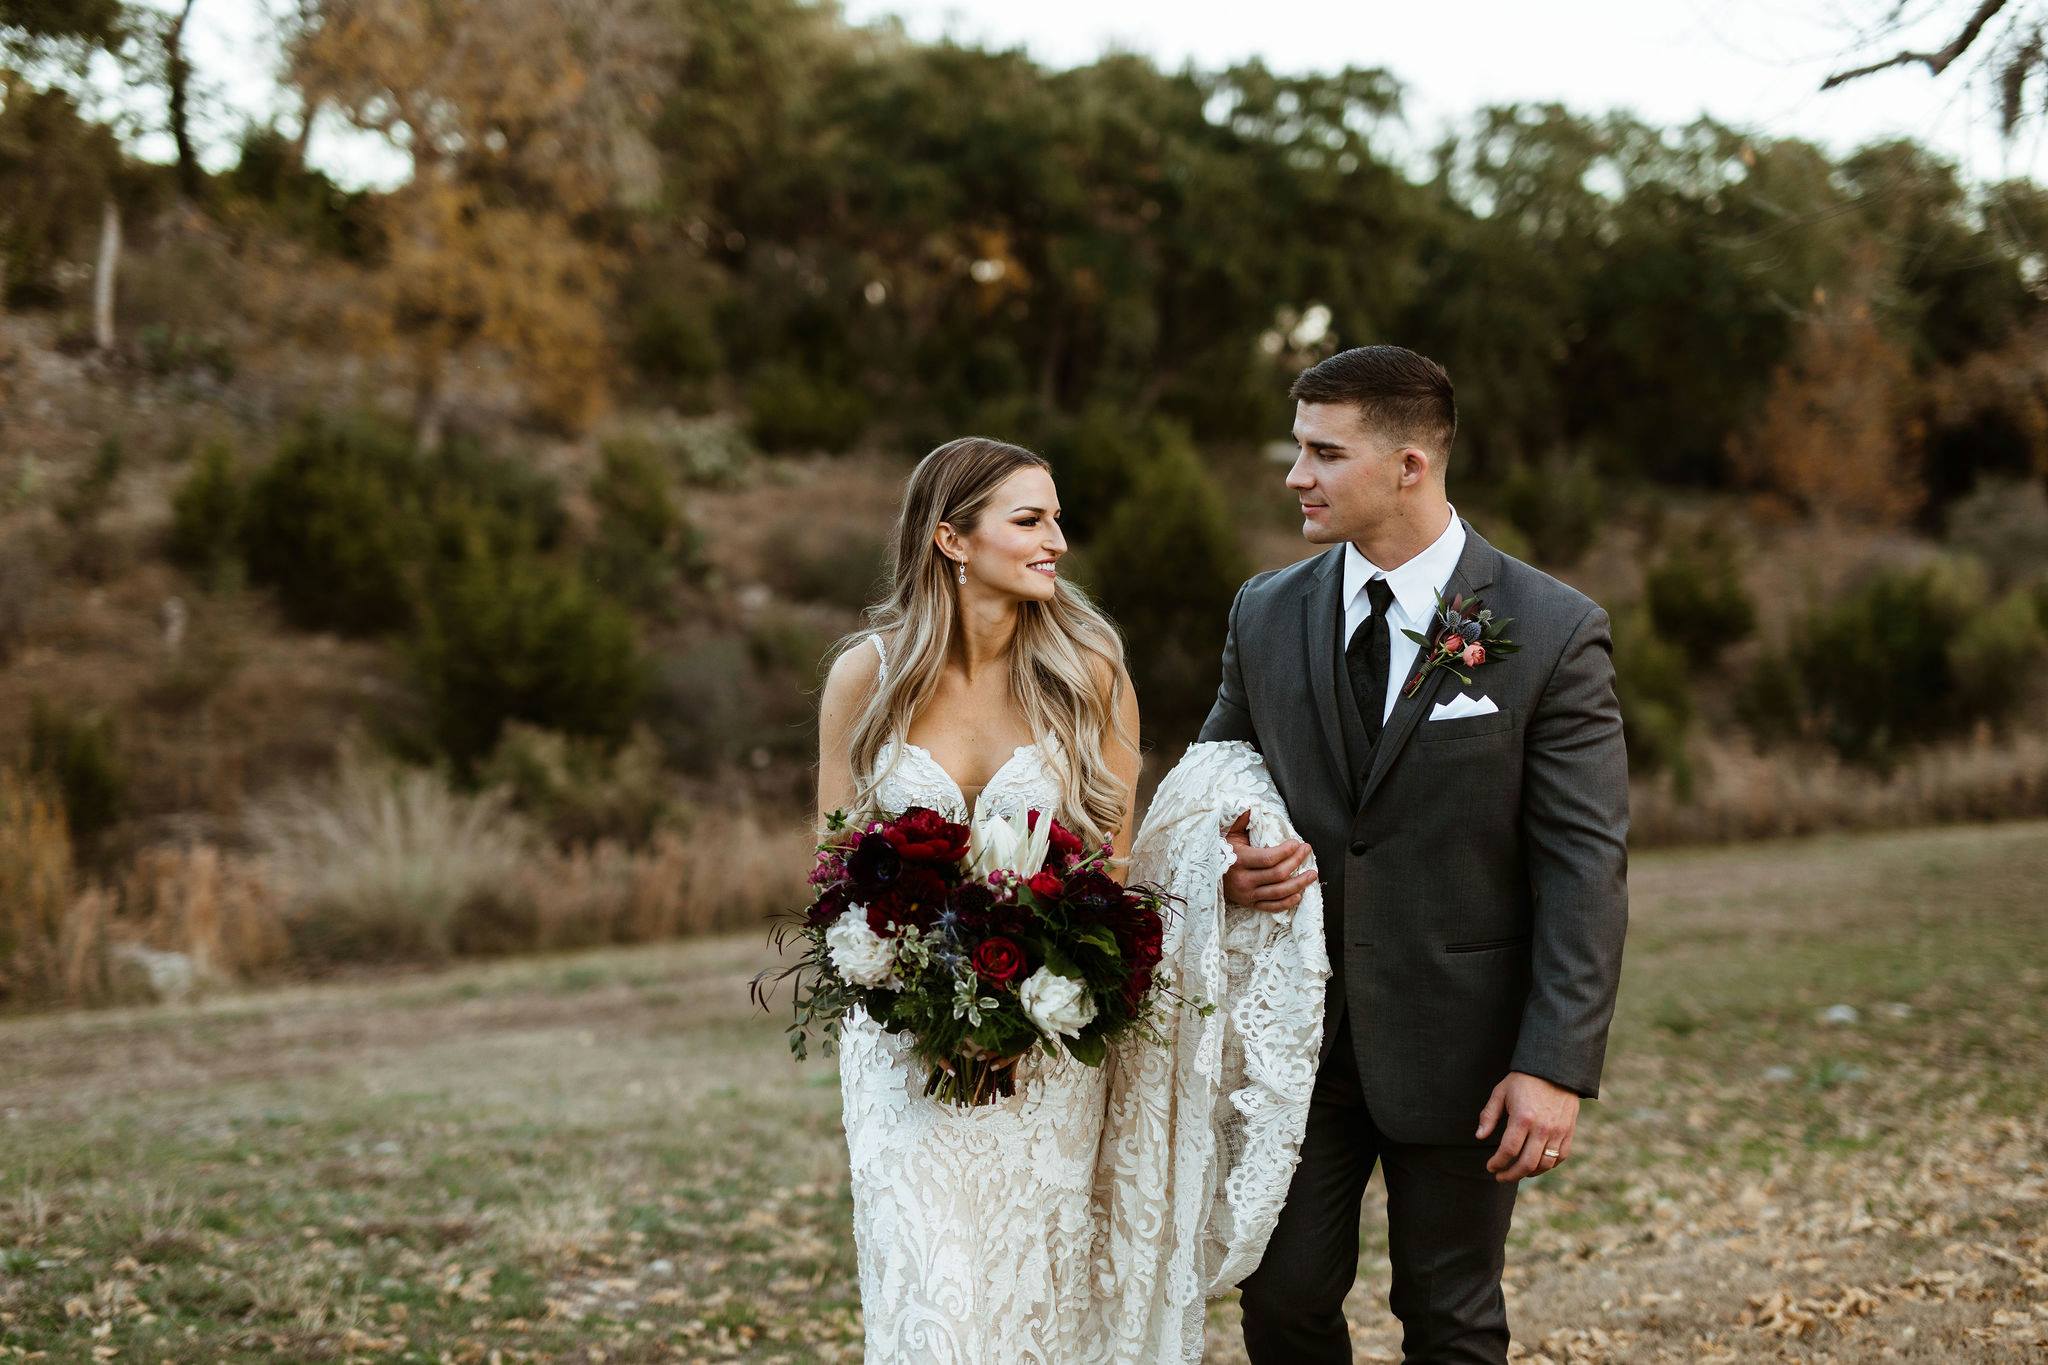 Wedding at Remi's Ridge, Coordination and Design by Touch of Whimsy, Photography by Wayfarer Photography